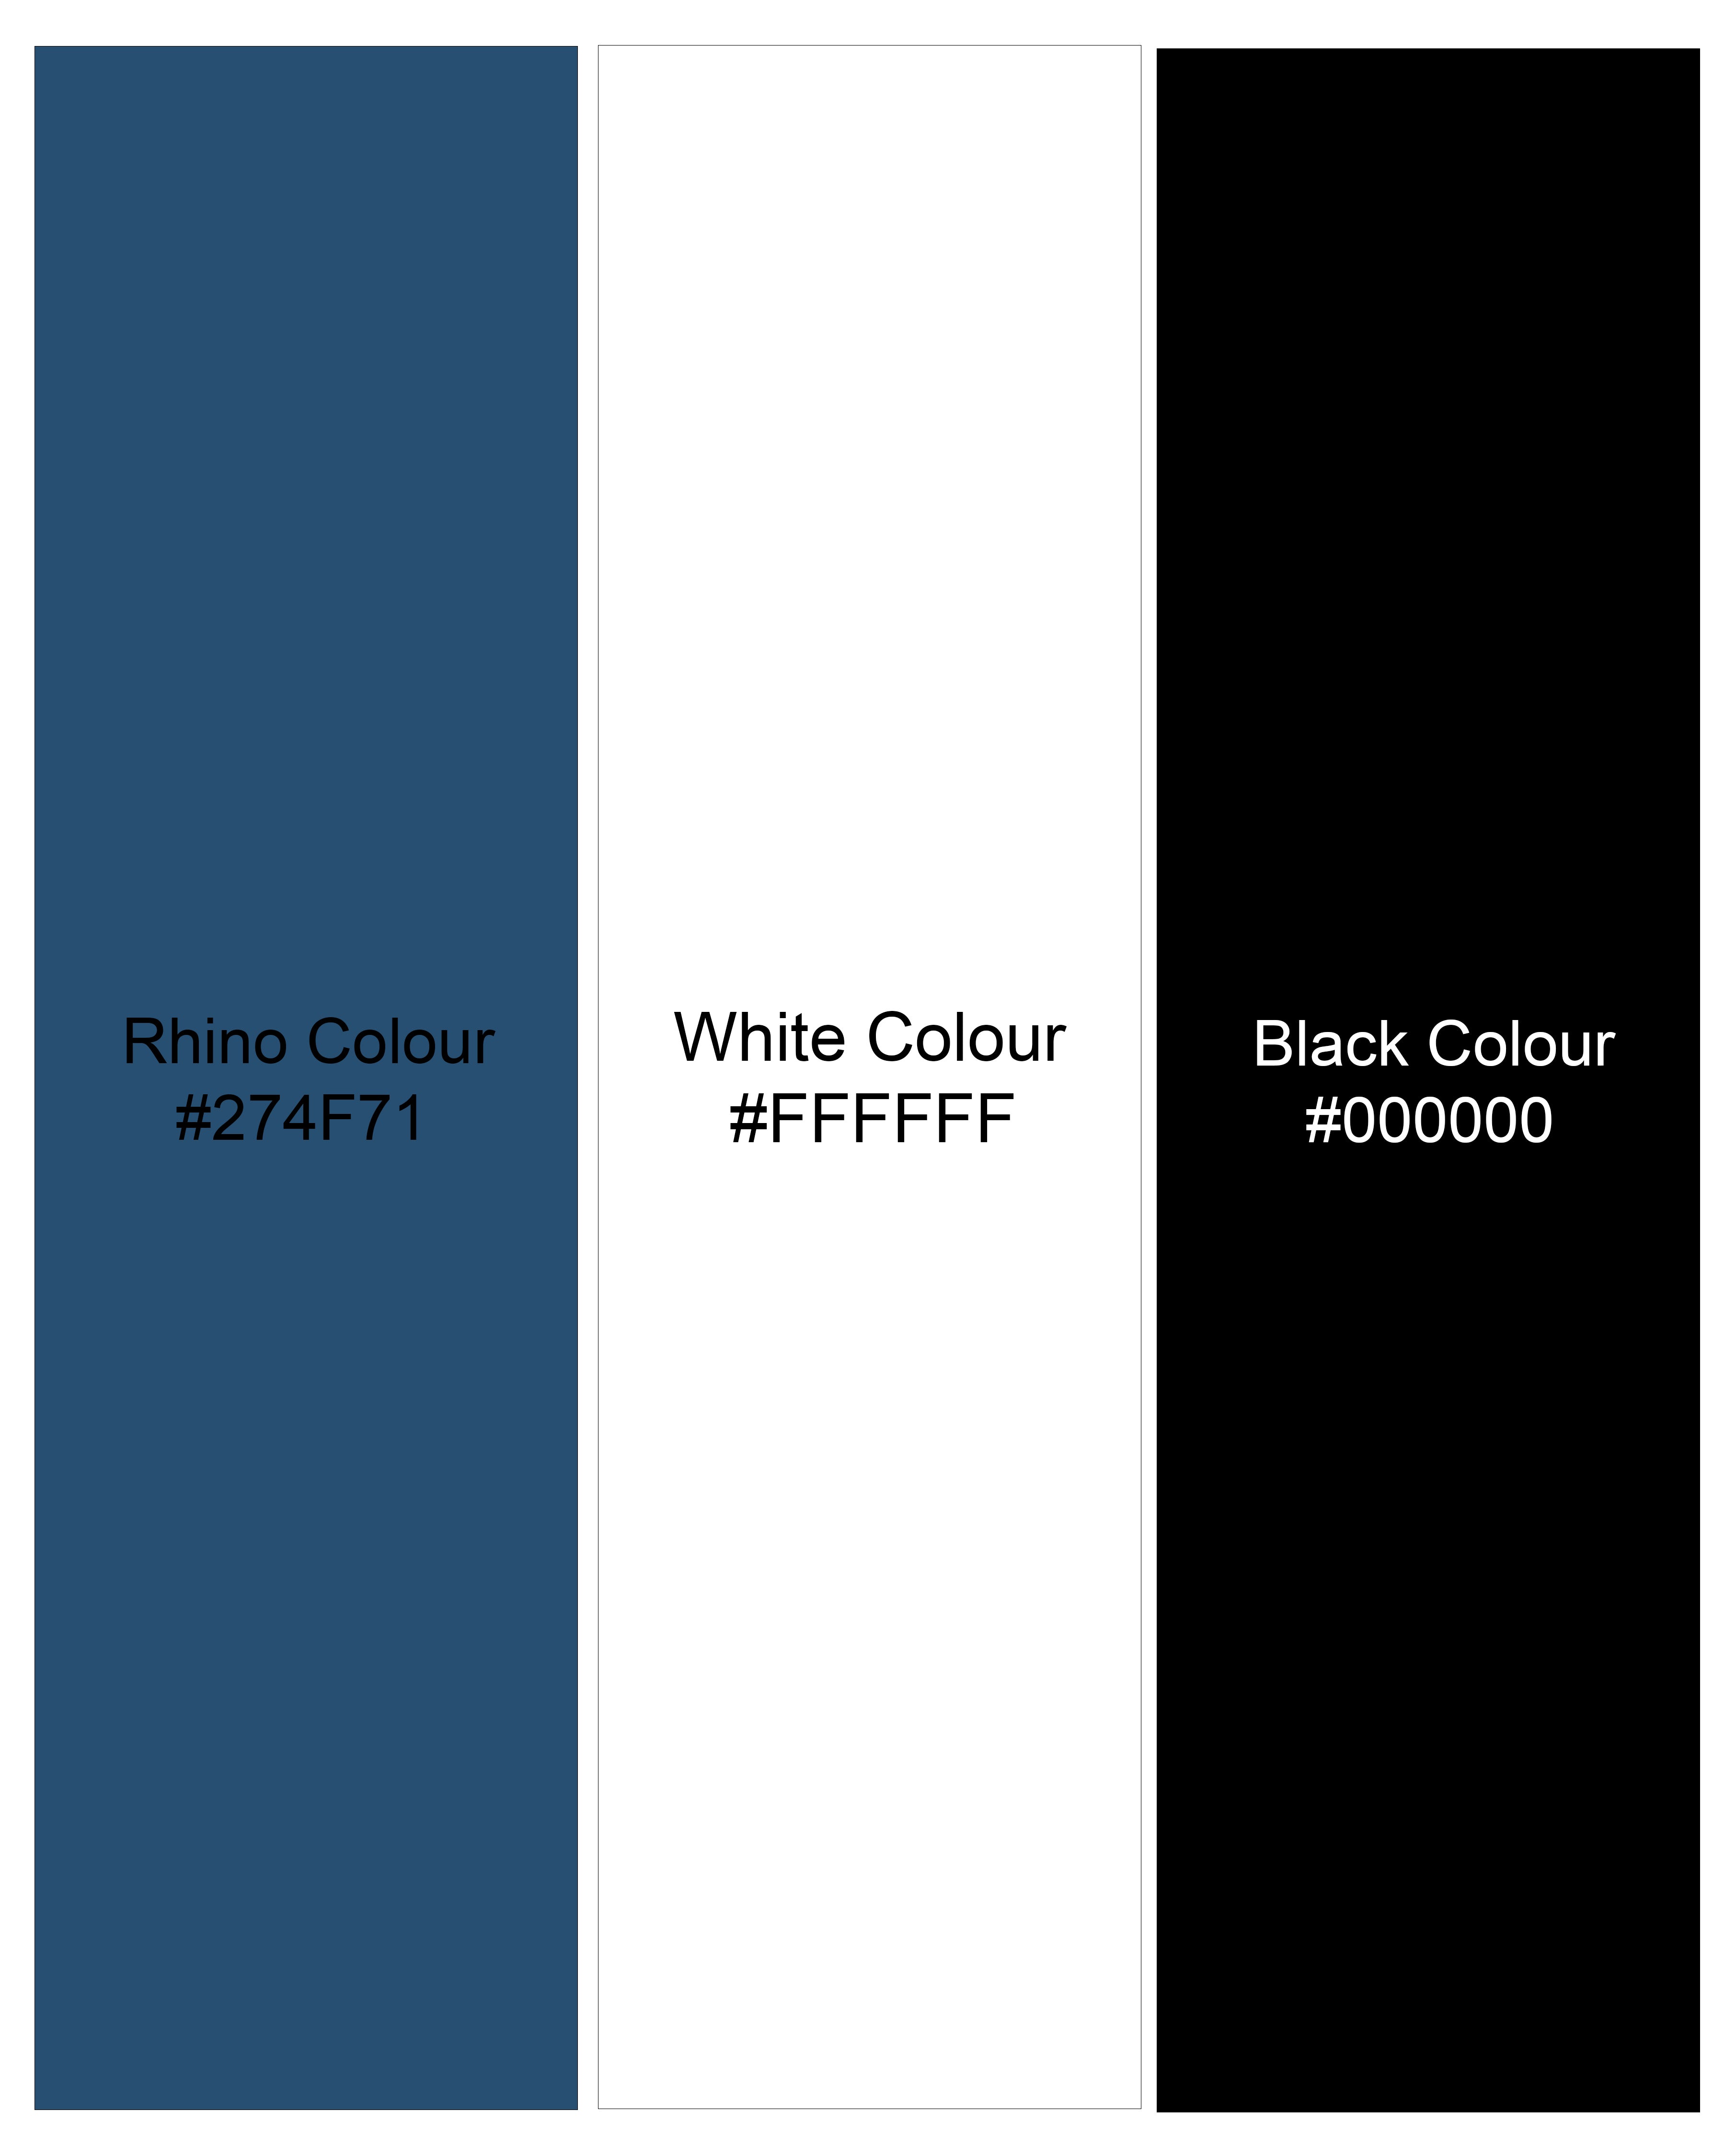 Rhino Blue with Black and White Textured Organic Cotton Pique Polo TS846-S, TS846-M, TS846-L, TS846-XL, TS846-XXL